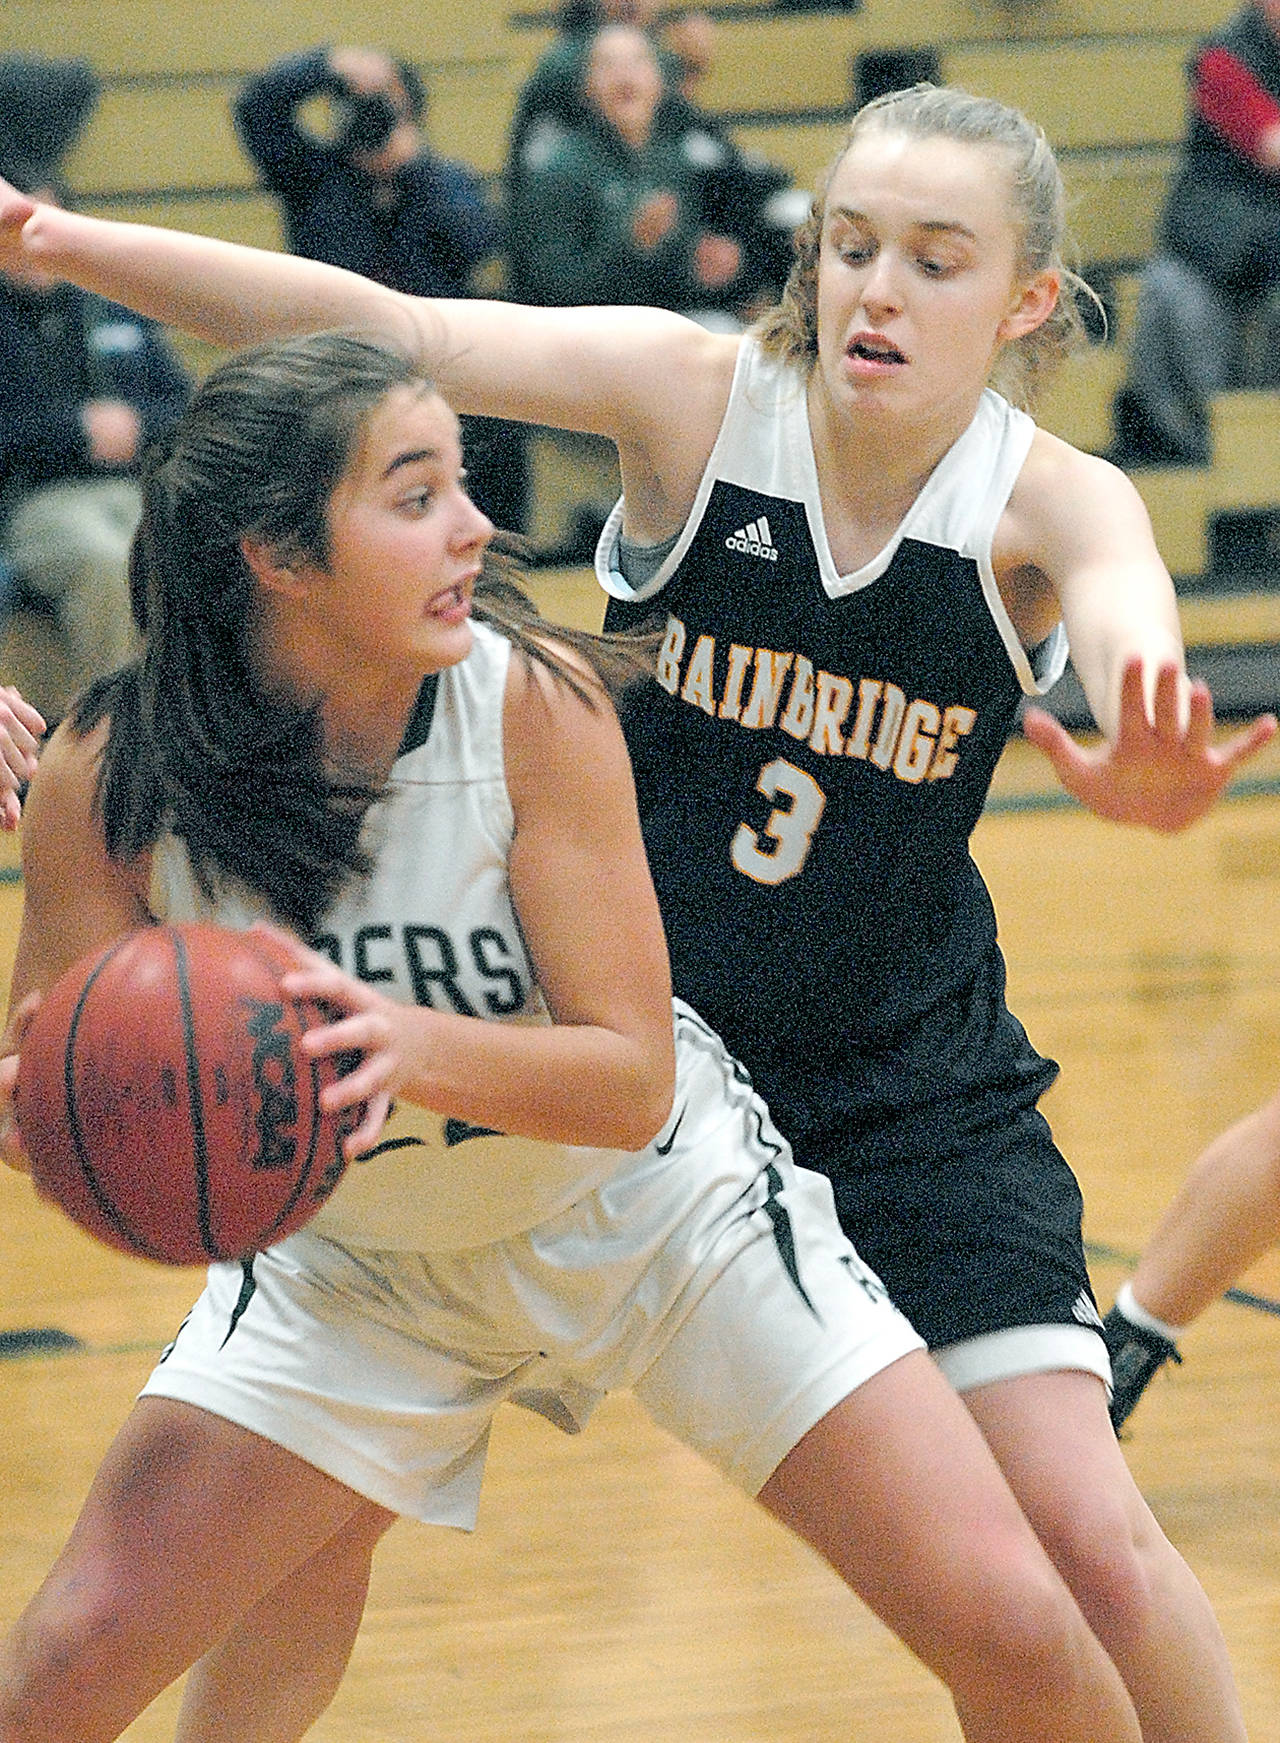 Port Angeles’ Eve Burke, left, scored 18 points and grabbed eight rebounds in Wednesday’s state win over a Clarkston team with four players 5-foot-11 or taller. (Keith Thorpe /Peninsula Daily News)